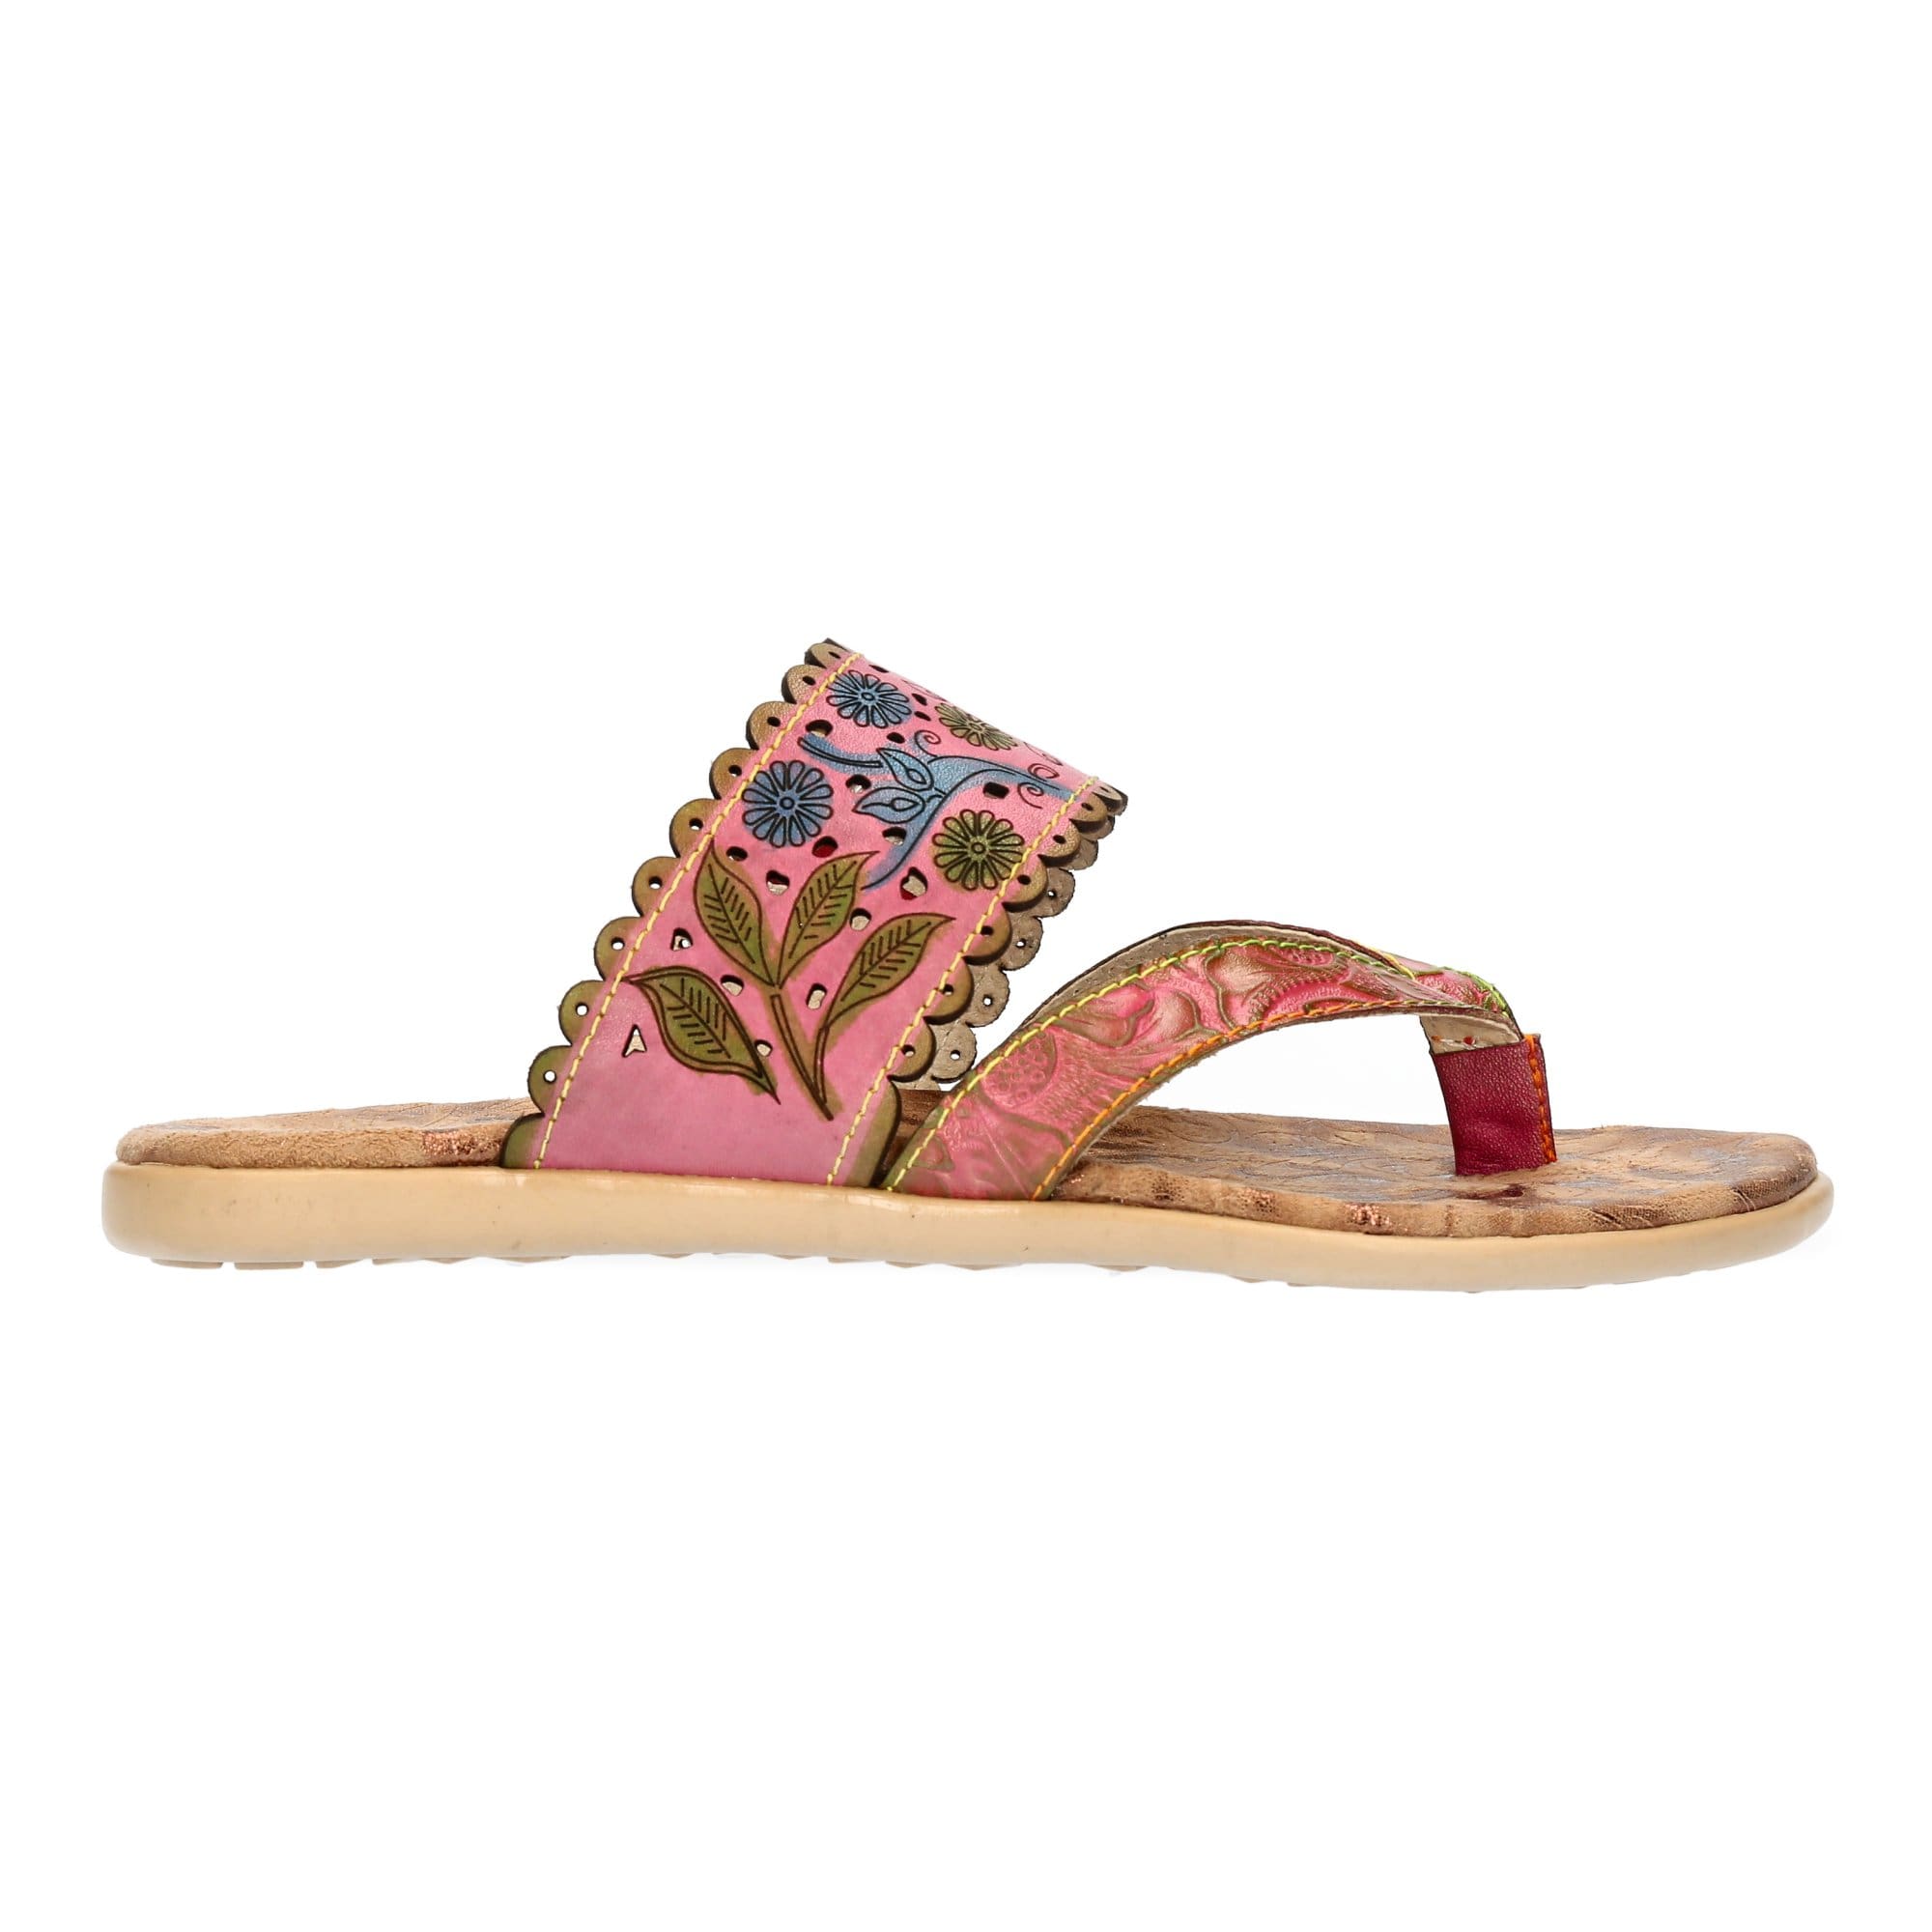 JACDEO 03 - 35 / Pink - Mule